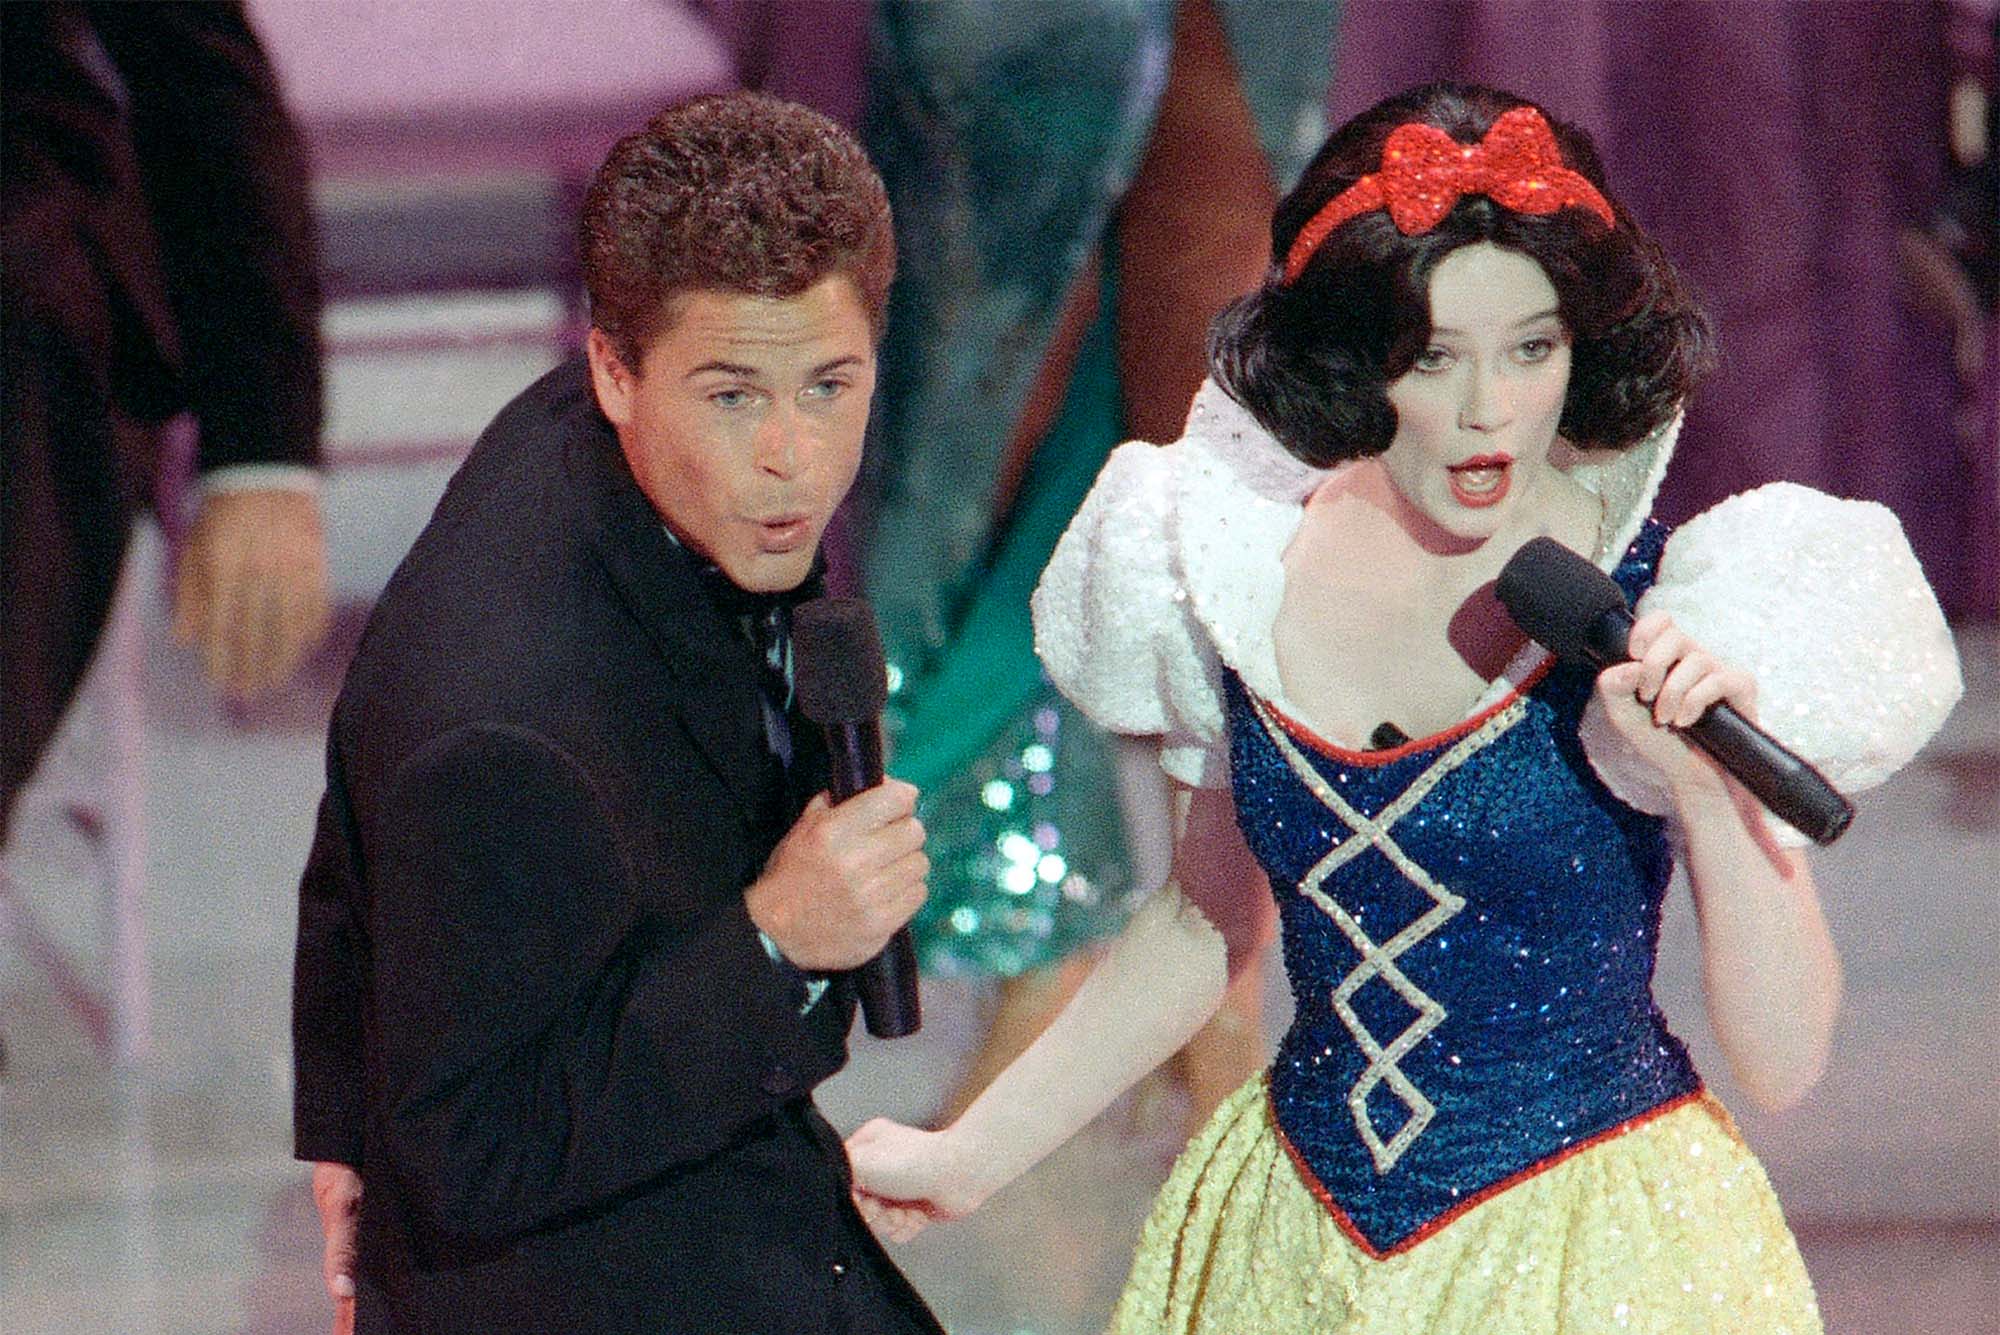 In this March 30, 1989 file photo, actor Rob Lowe croons a tune to Snow White during the opening number for the 61st Academy Awards presentation in Los Angeles. (AP Photo/ Reed Saxon, File)